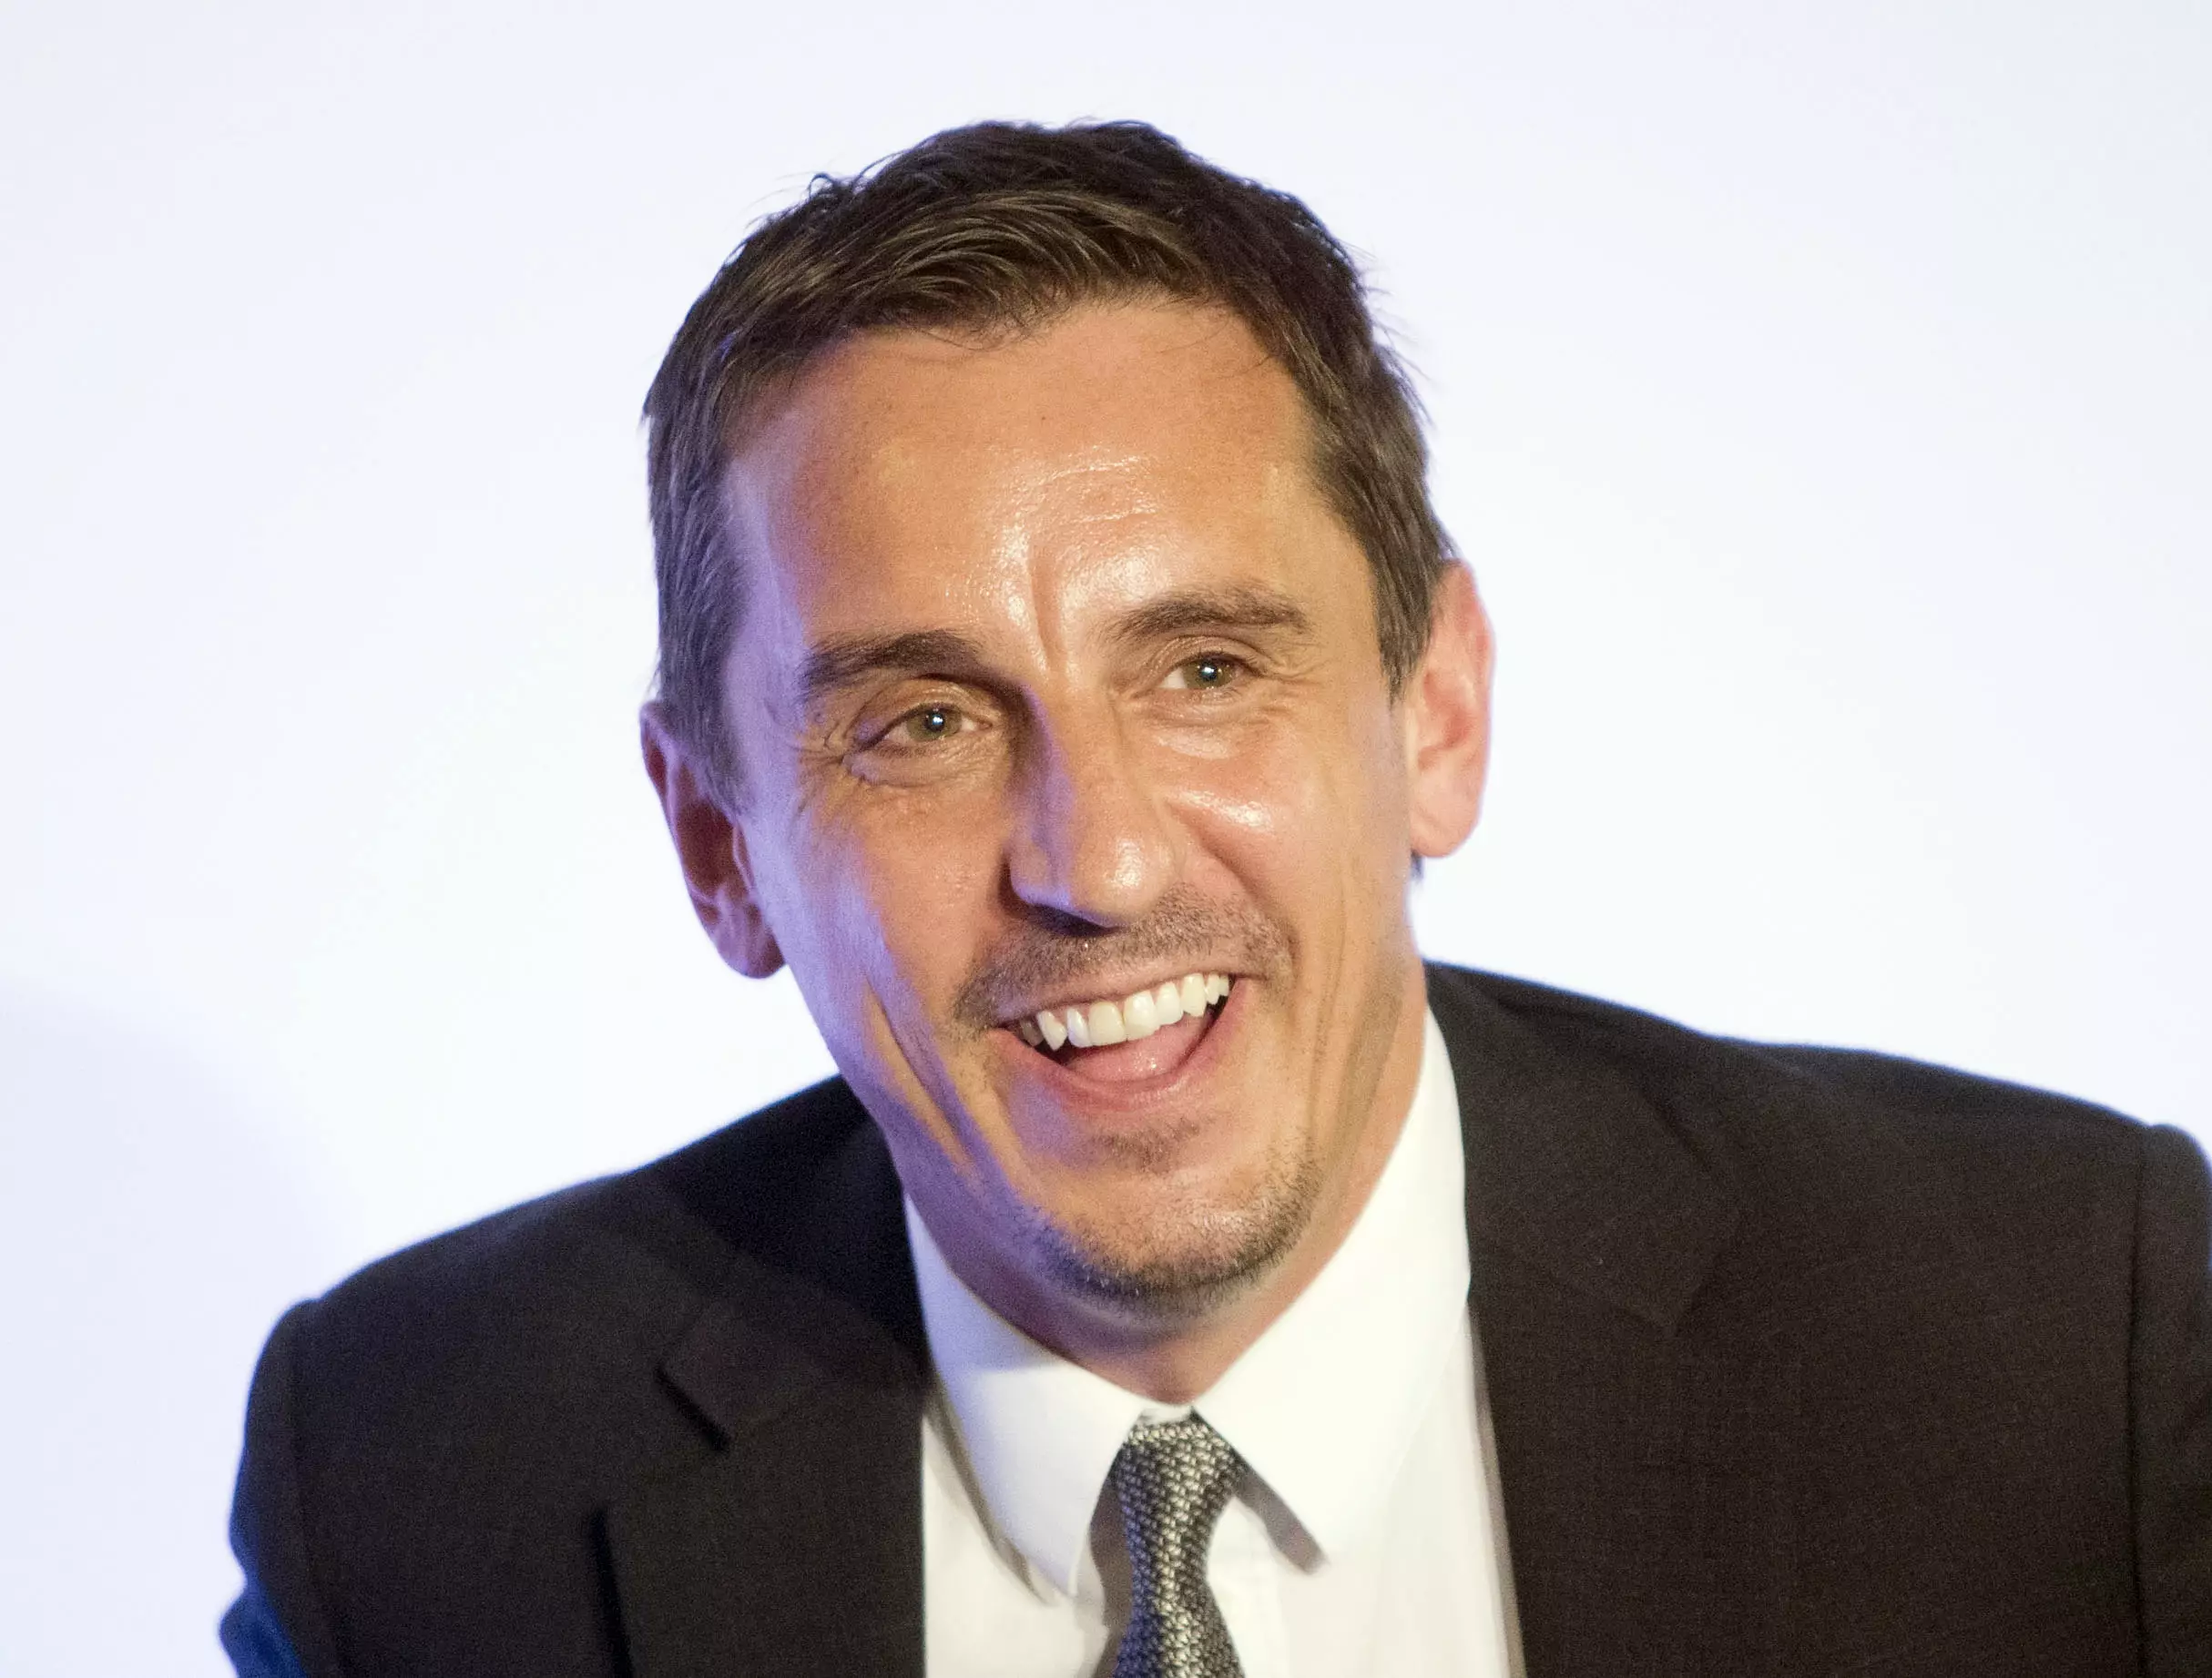 Gary Neville Hits Back At Jamie Carragher Barb With Great Comeback